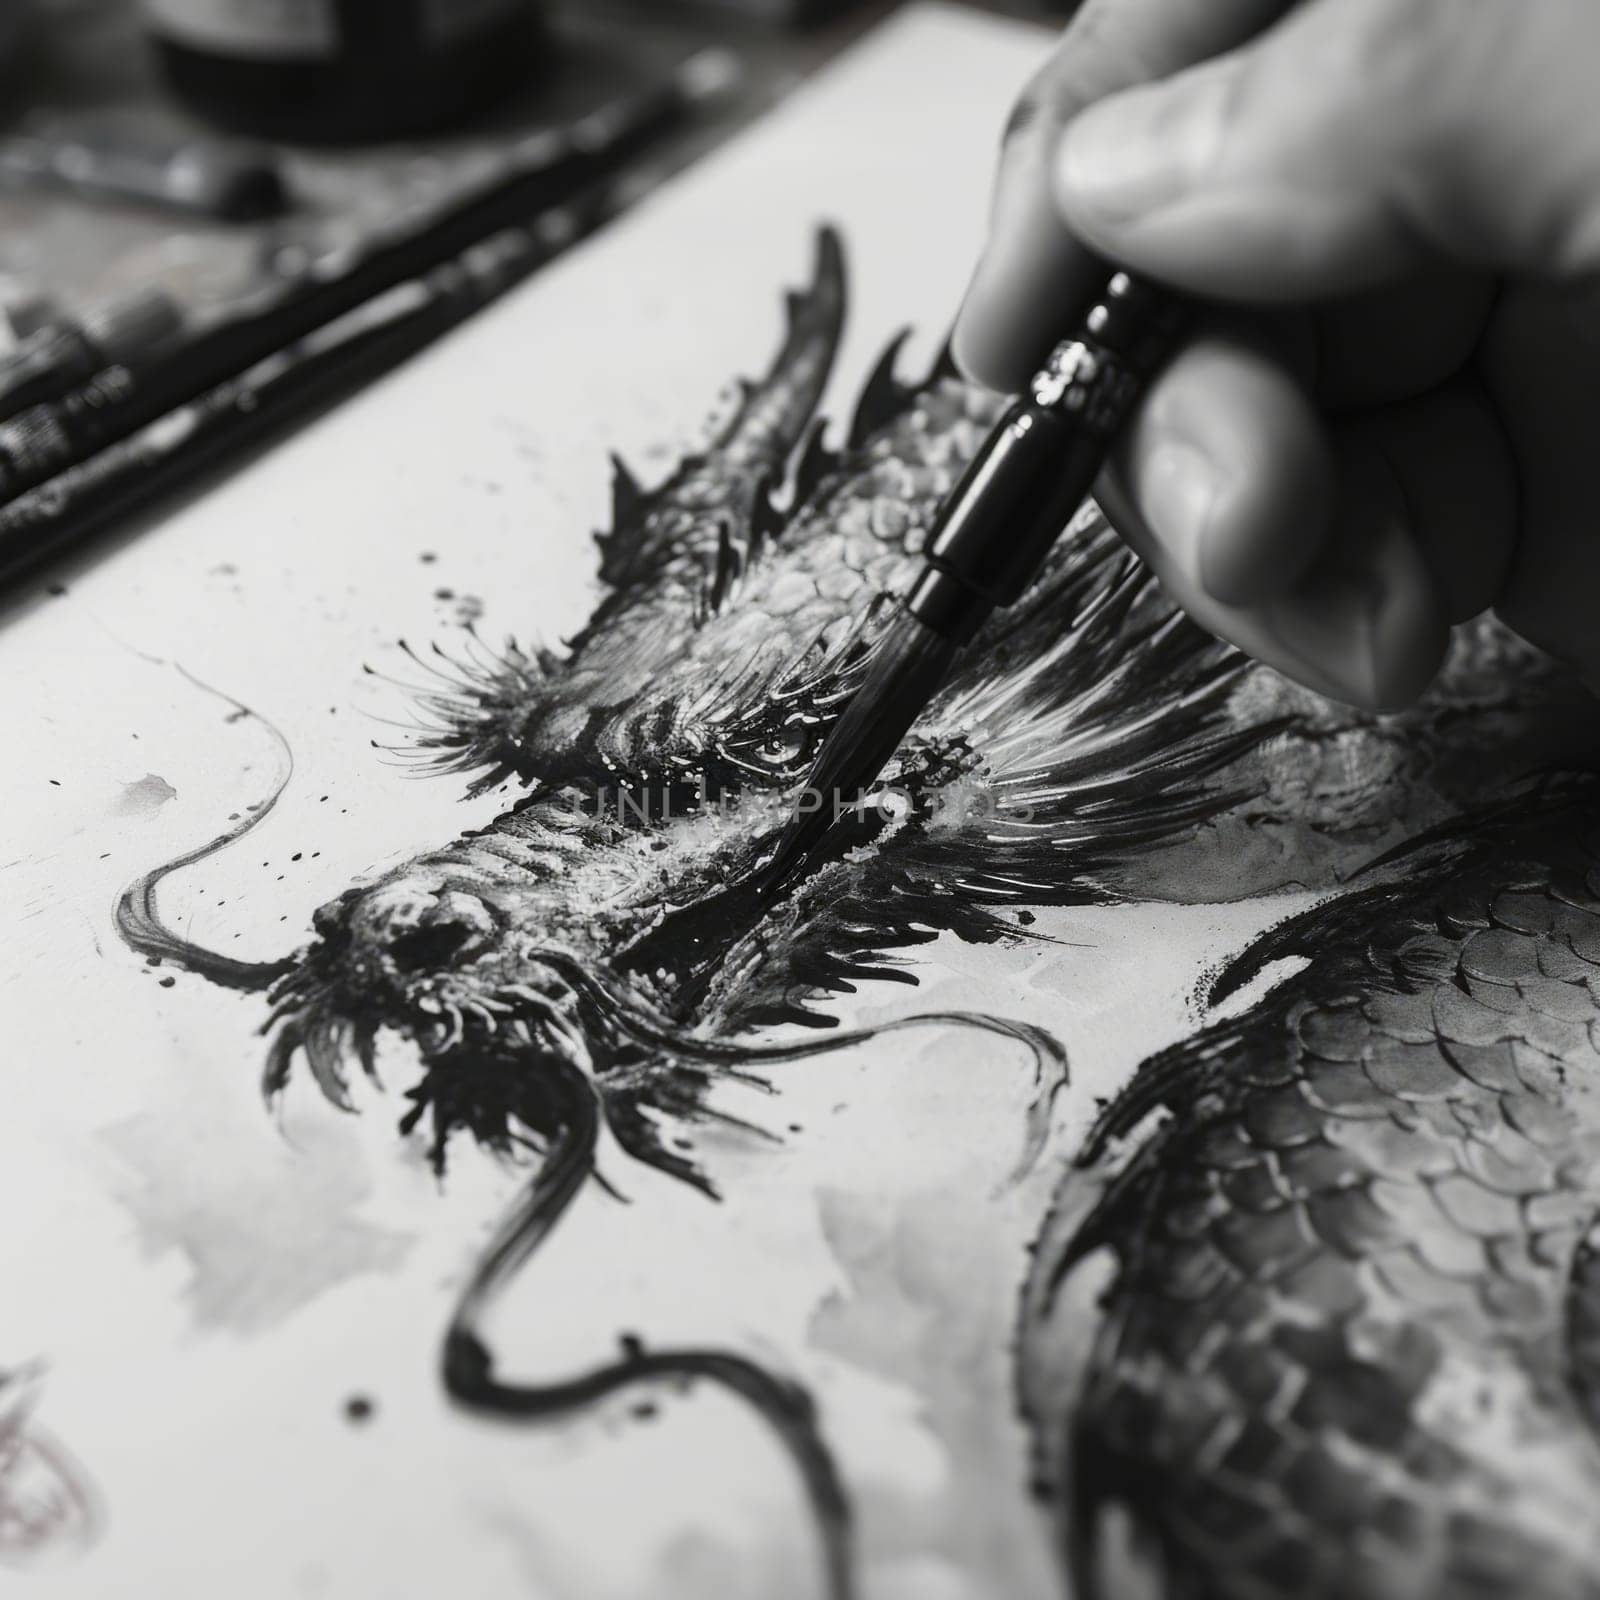 Black and white painting of a dragon. Year of the dragon concept.